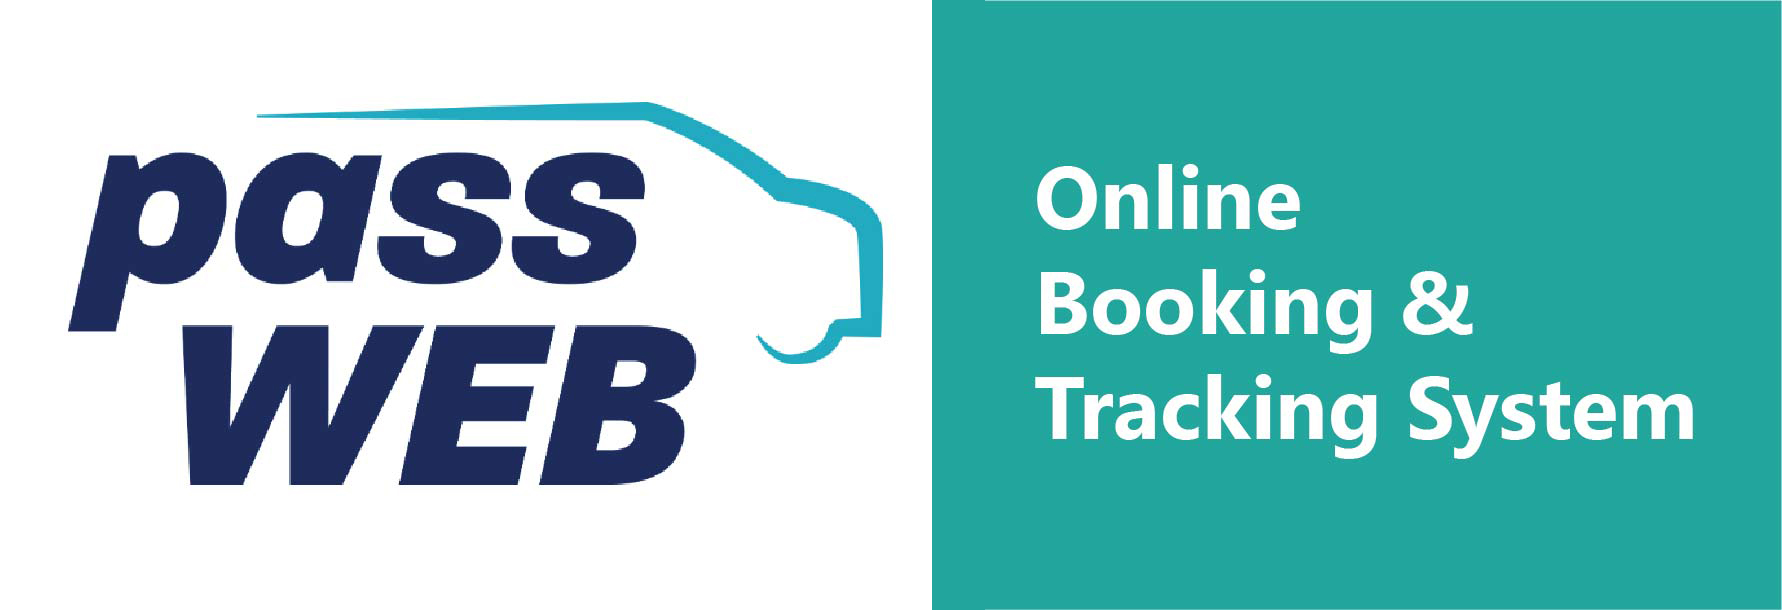 PassWeb Online Booking & Tracking System